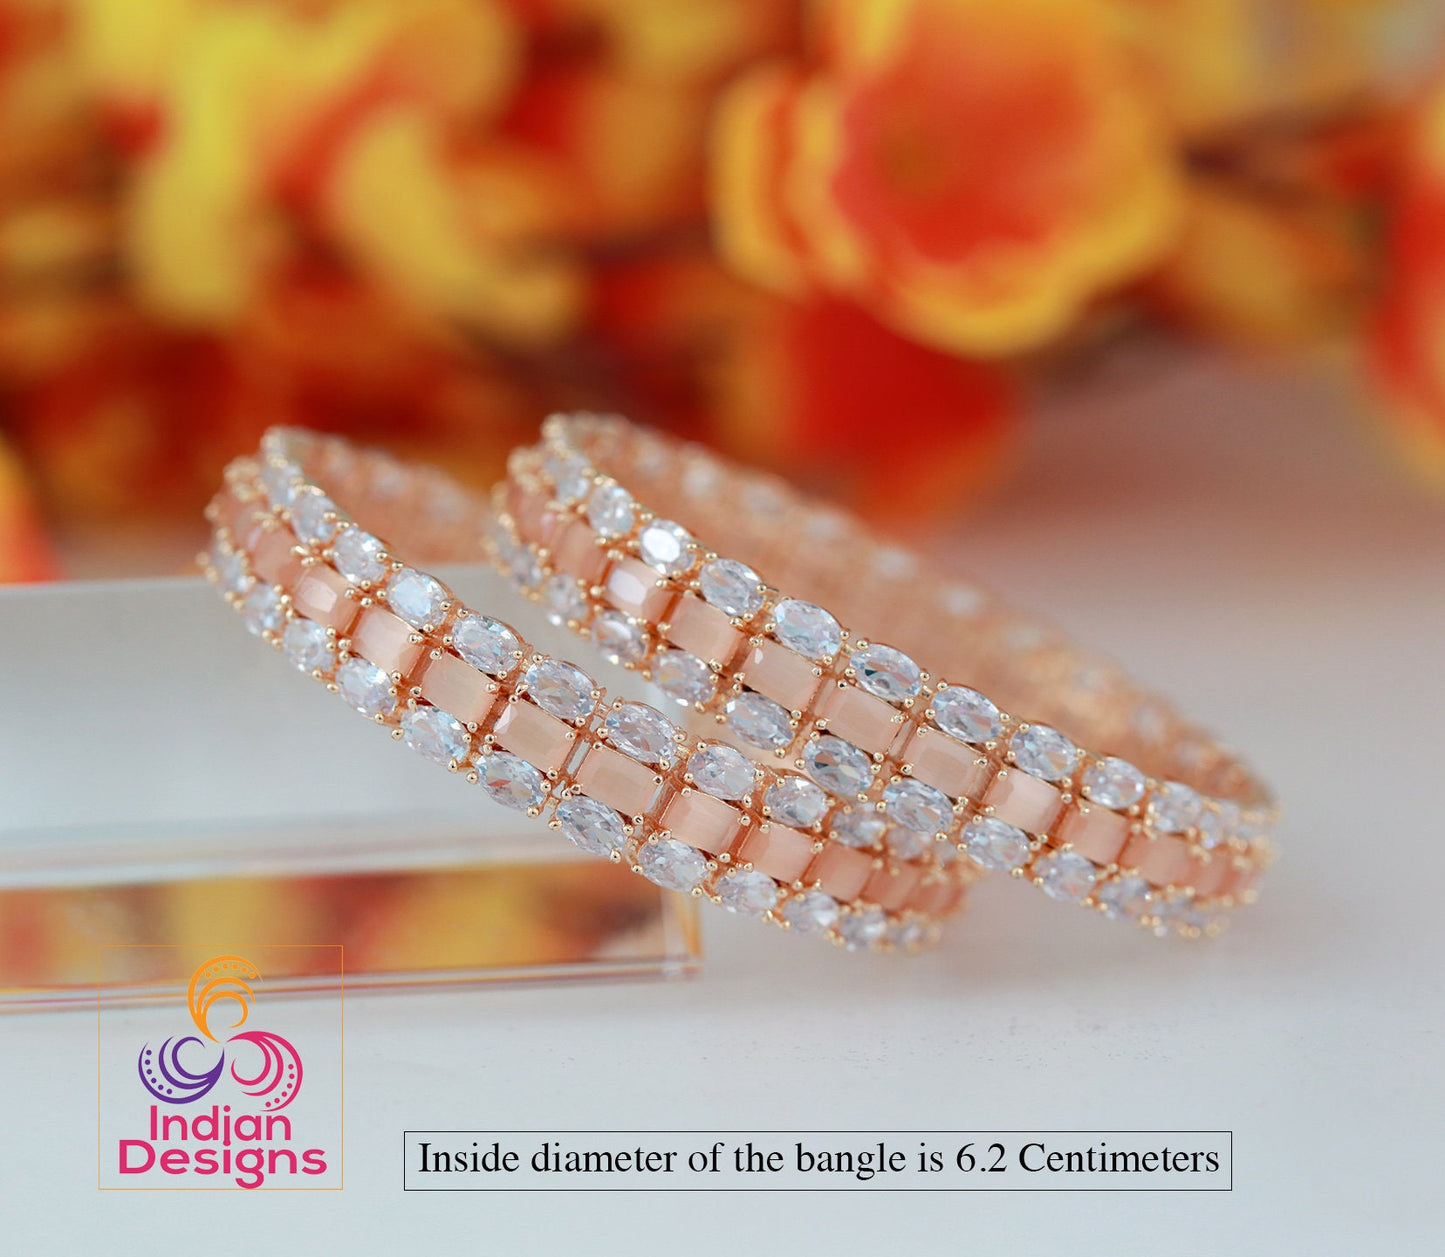 Exceptional Quality Pair of Rose Gold American diamond Bangles 2.8 Size | Crystal bridal bangles | Emerald cut Peach stone Statement Bangles